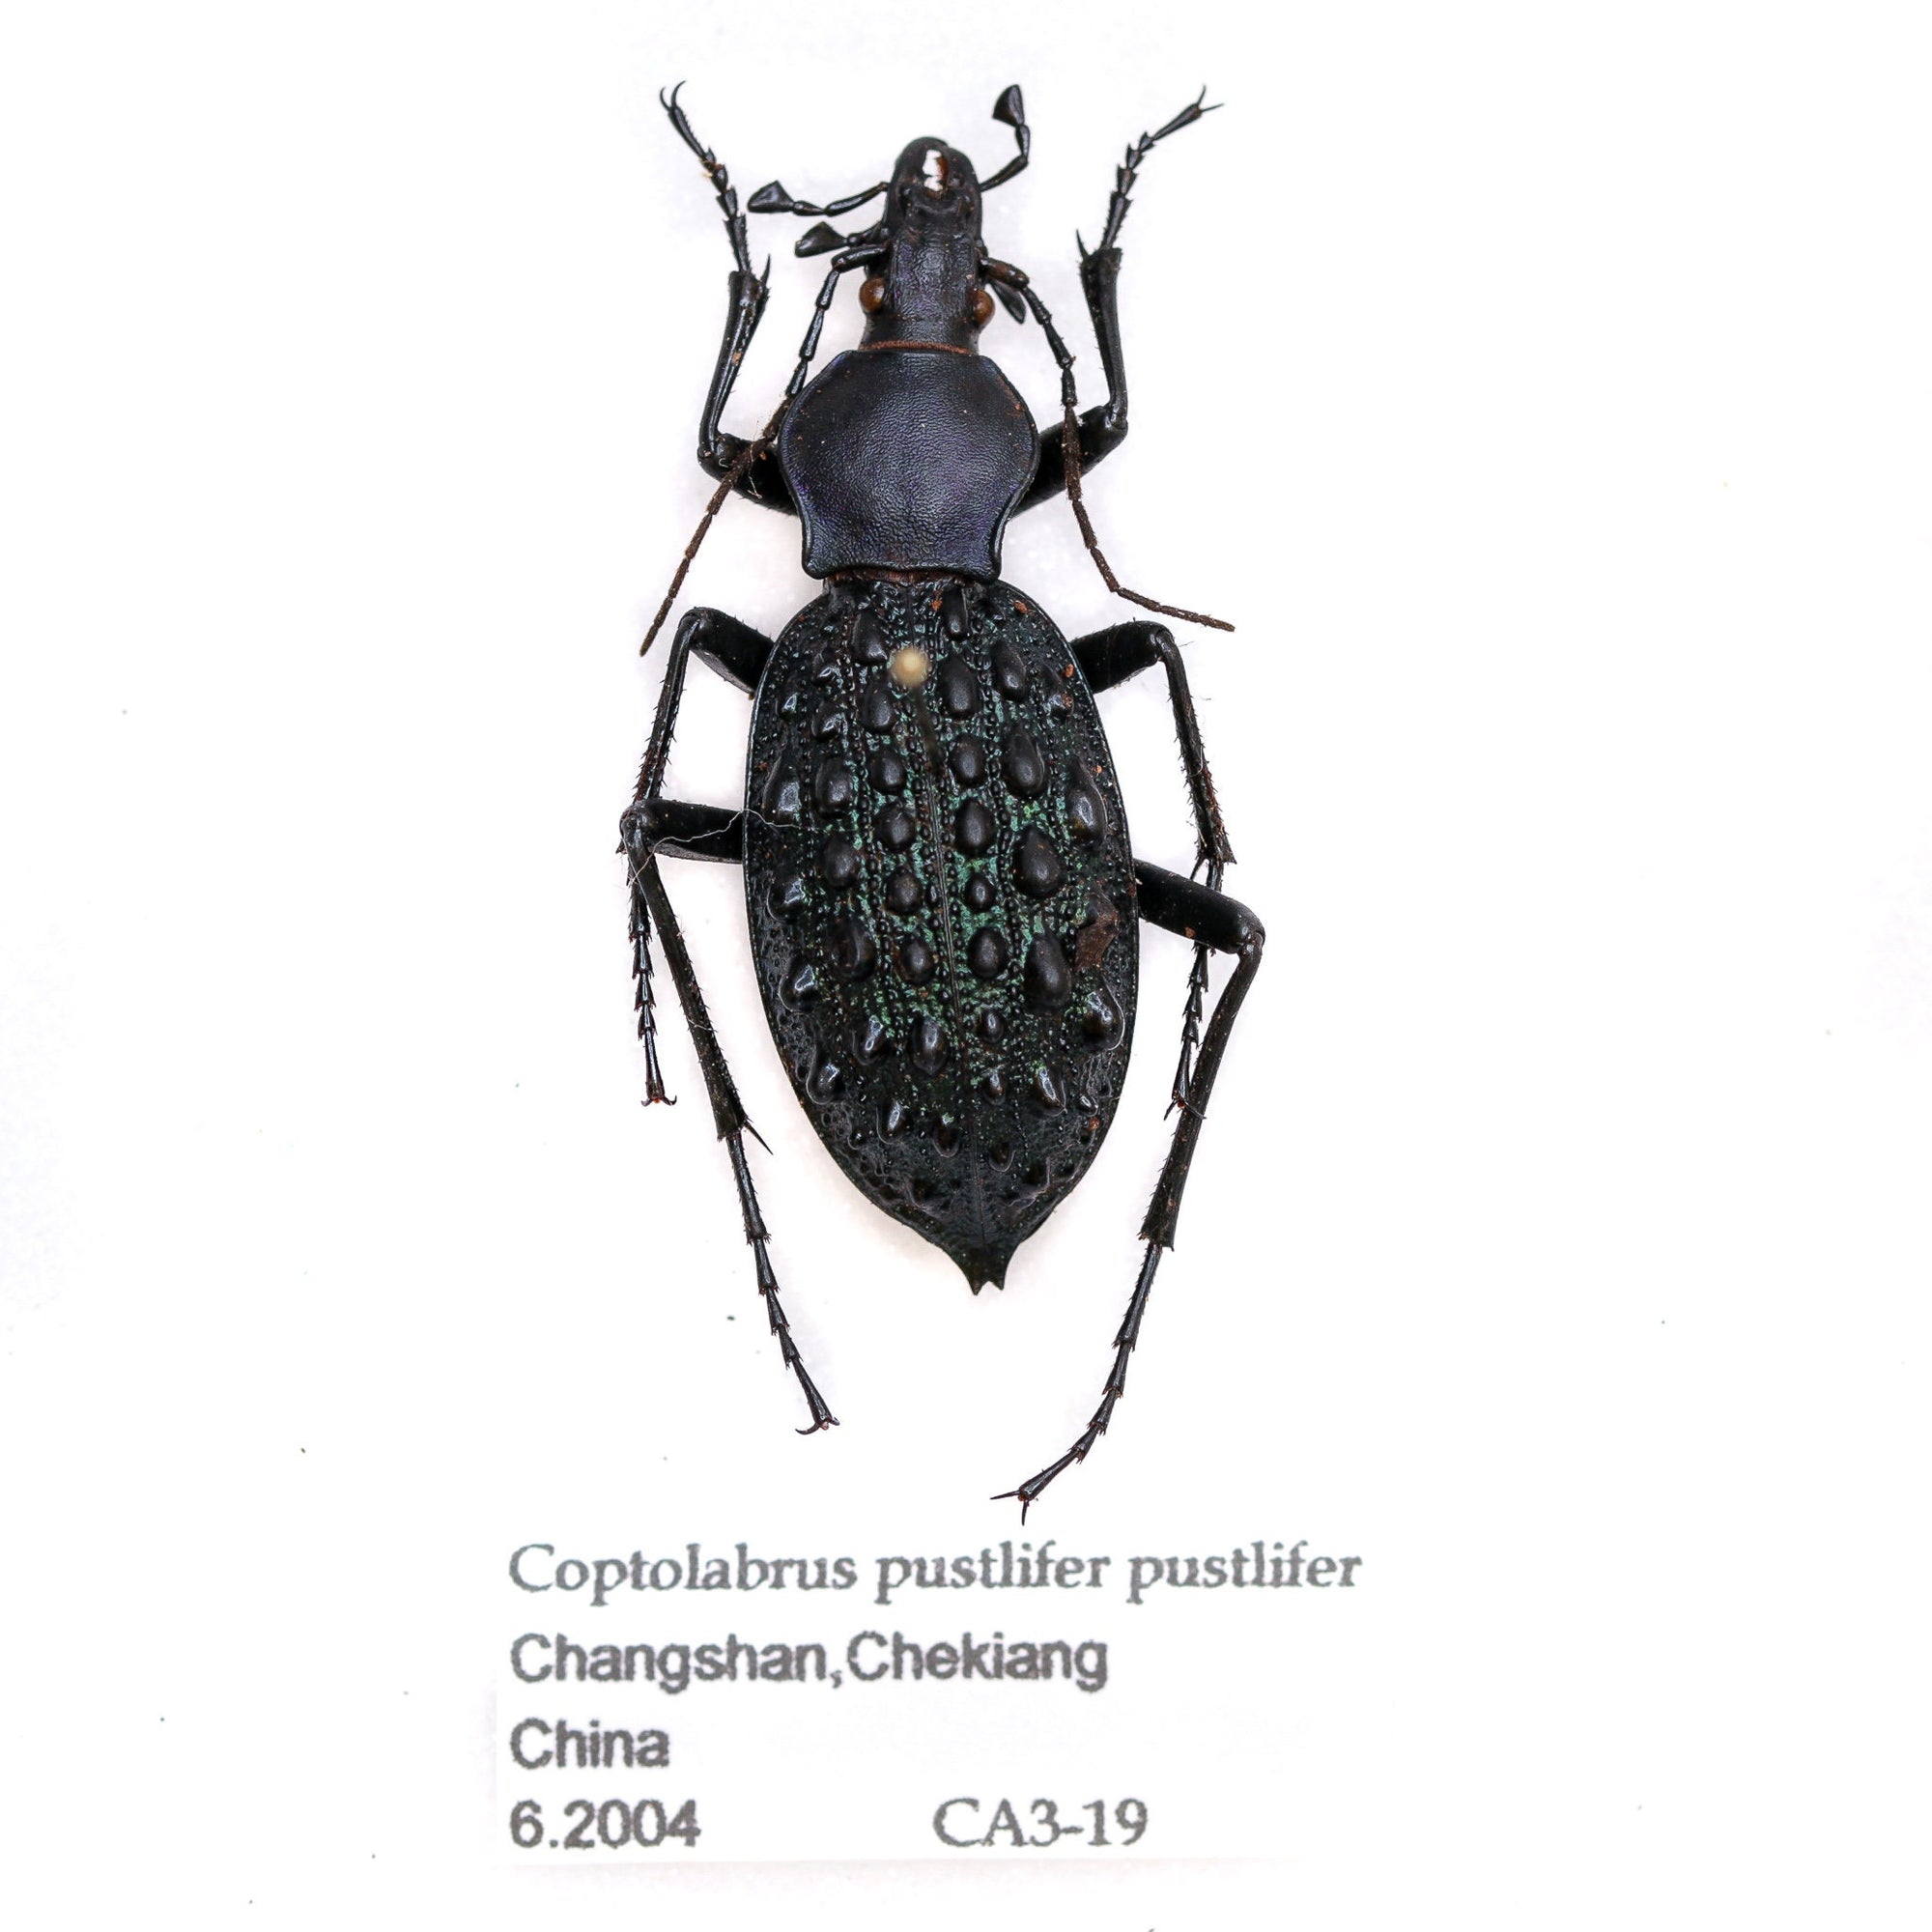 Real Beetle Collection | Pinned Entomology Insect Specimens and Data | Presented in a Gift Box